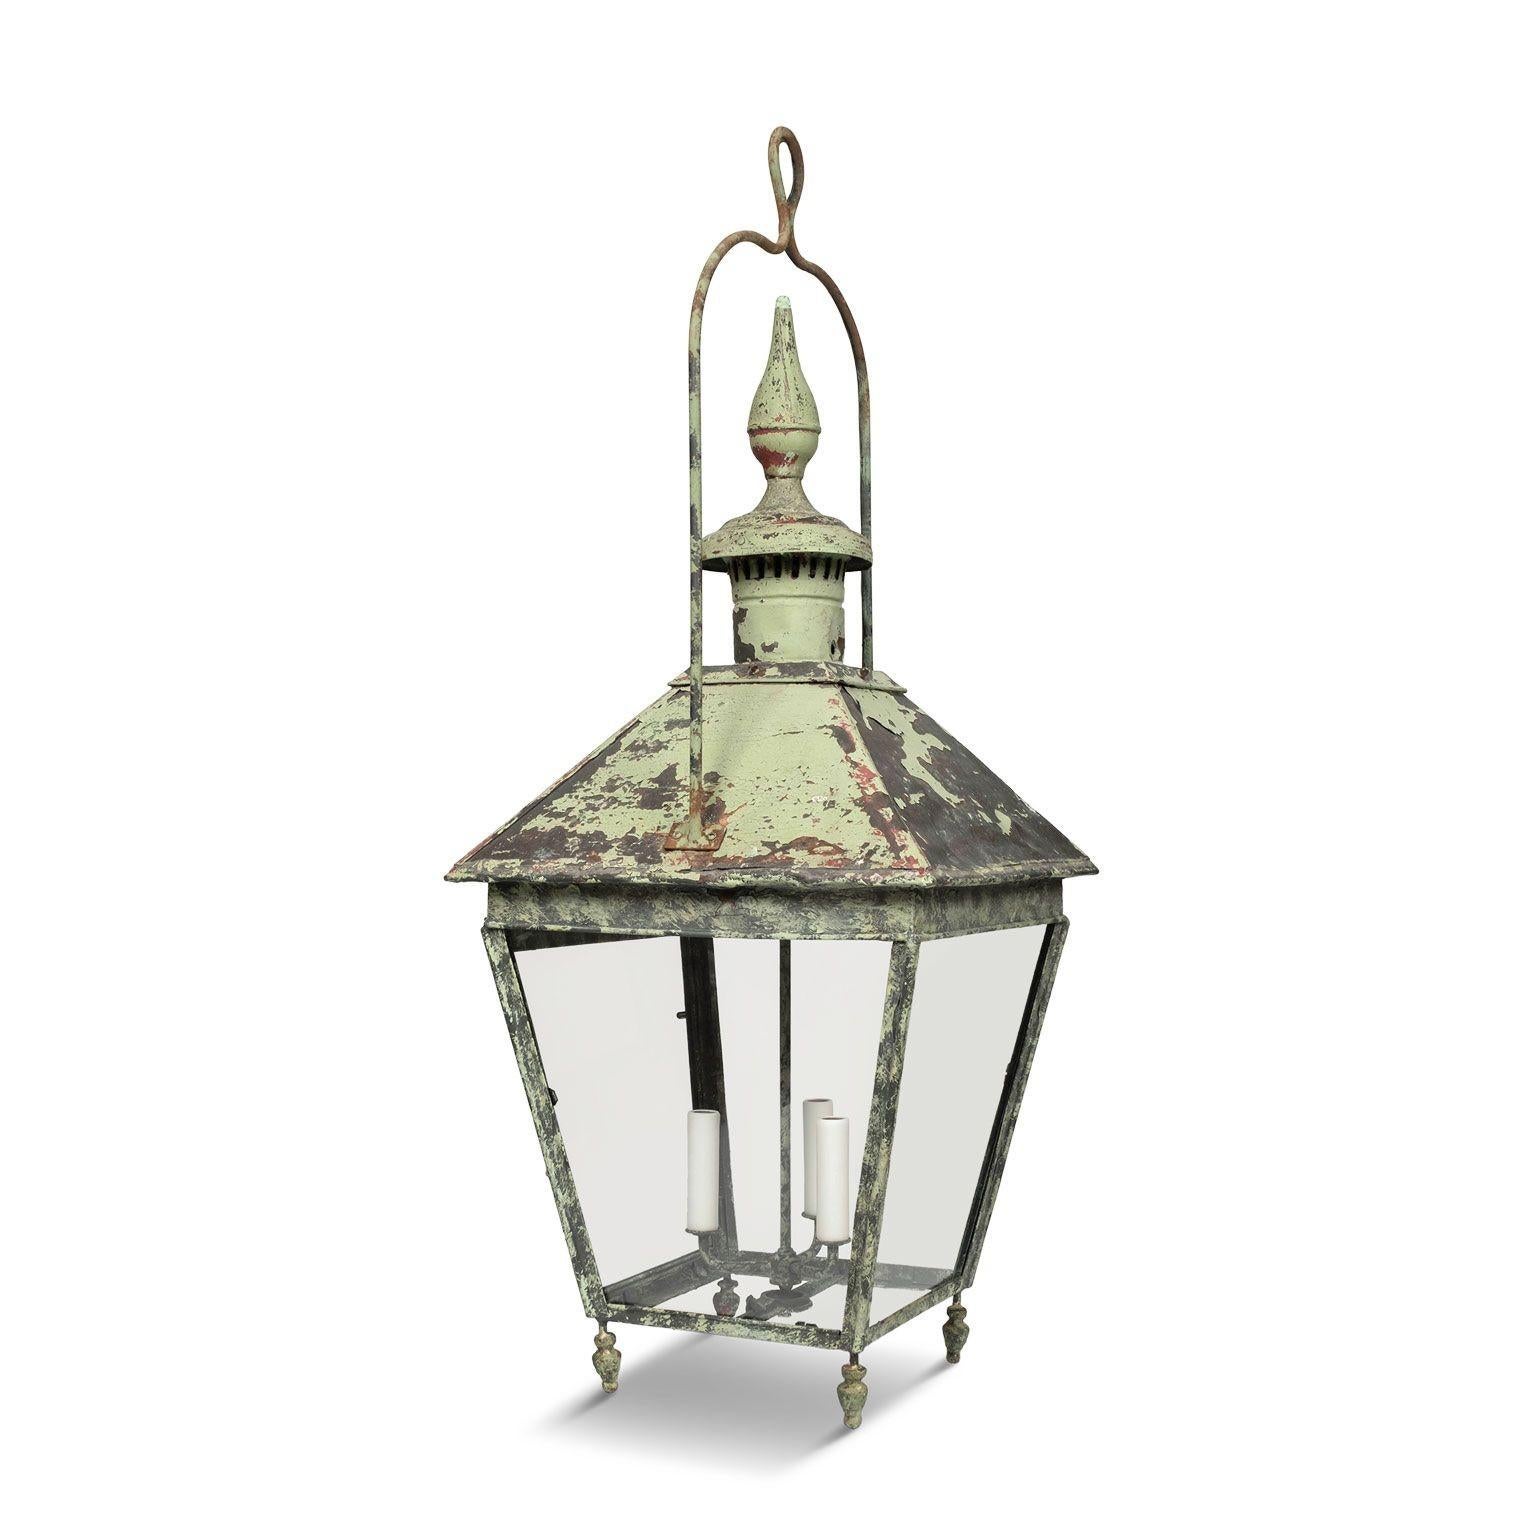 19th century French green-painted Copper and glass paneled lantern circa 1850-1889. Remnants of light green paint over natural verdigris green and mottled gray patina and nice, large scale. Originally served as a gas-lit street lantern - now newly